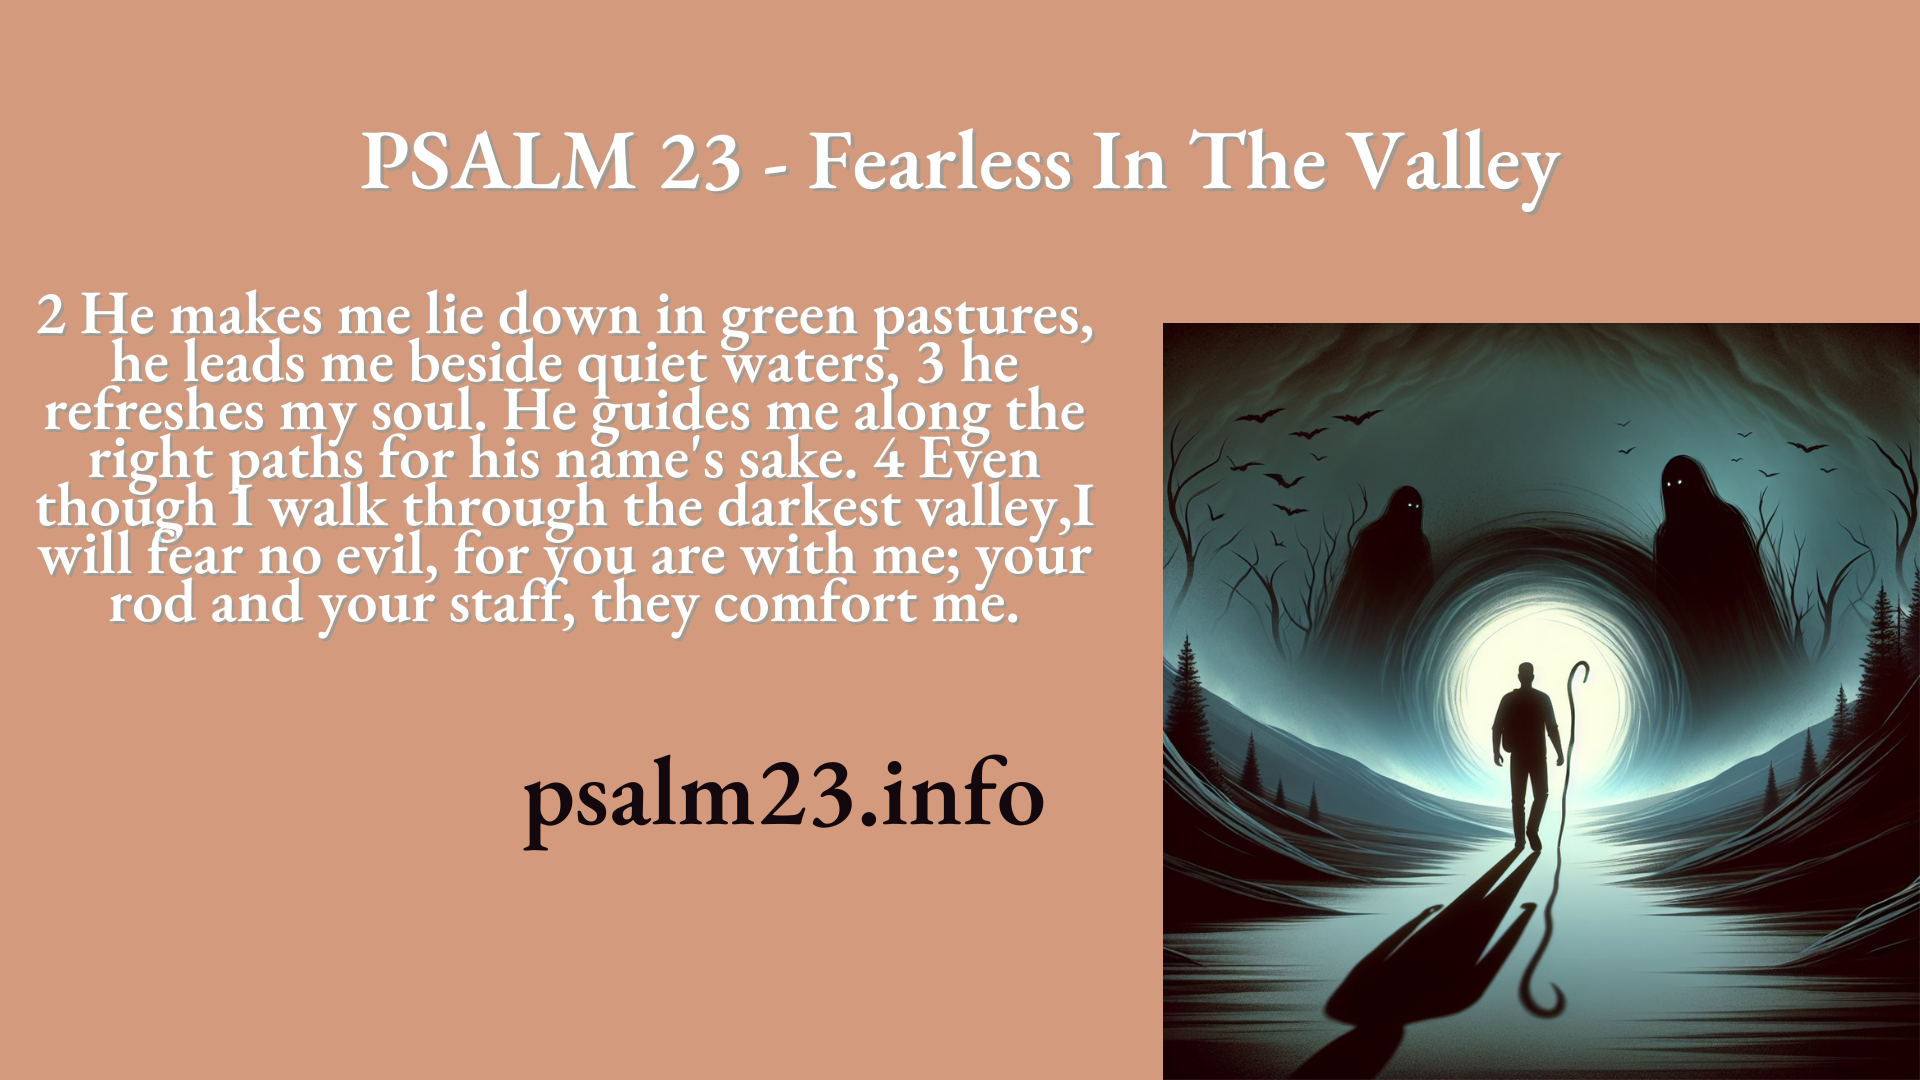 PSALM 23 - Fearless In The Valley